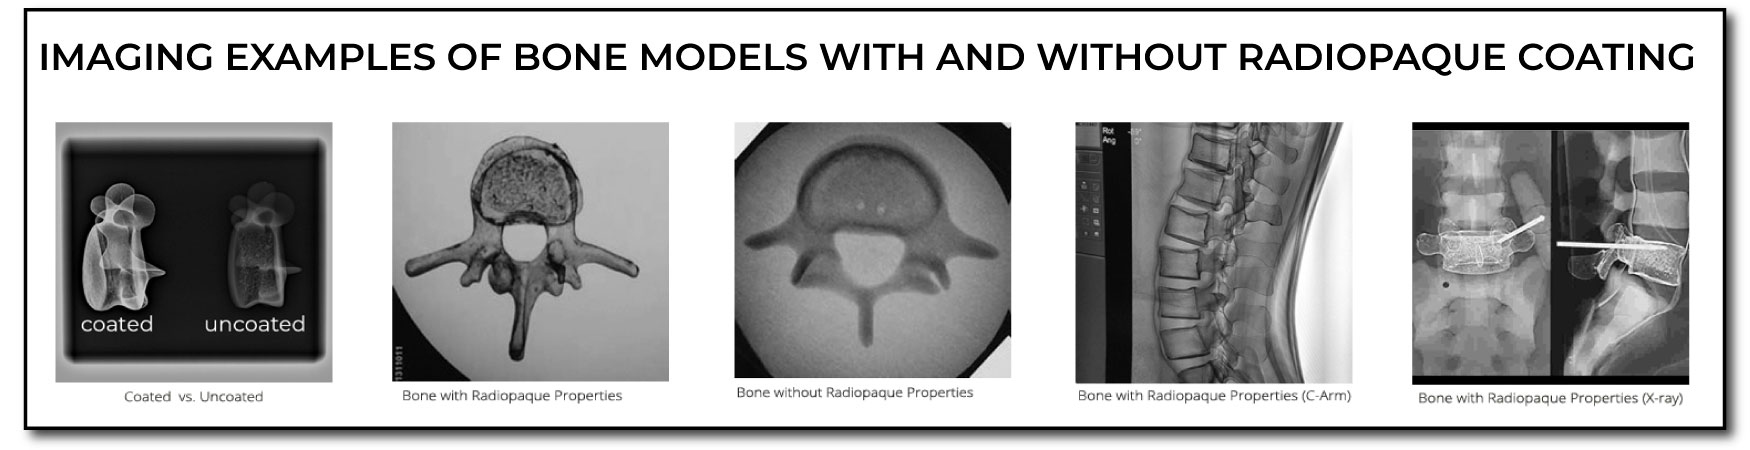 Imaging examples of bone models with and without radiopaque coating